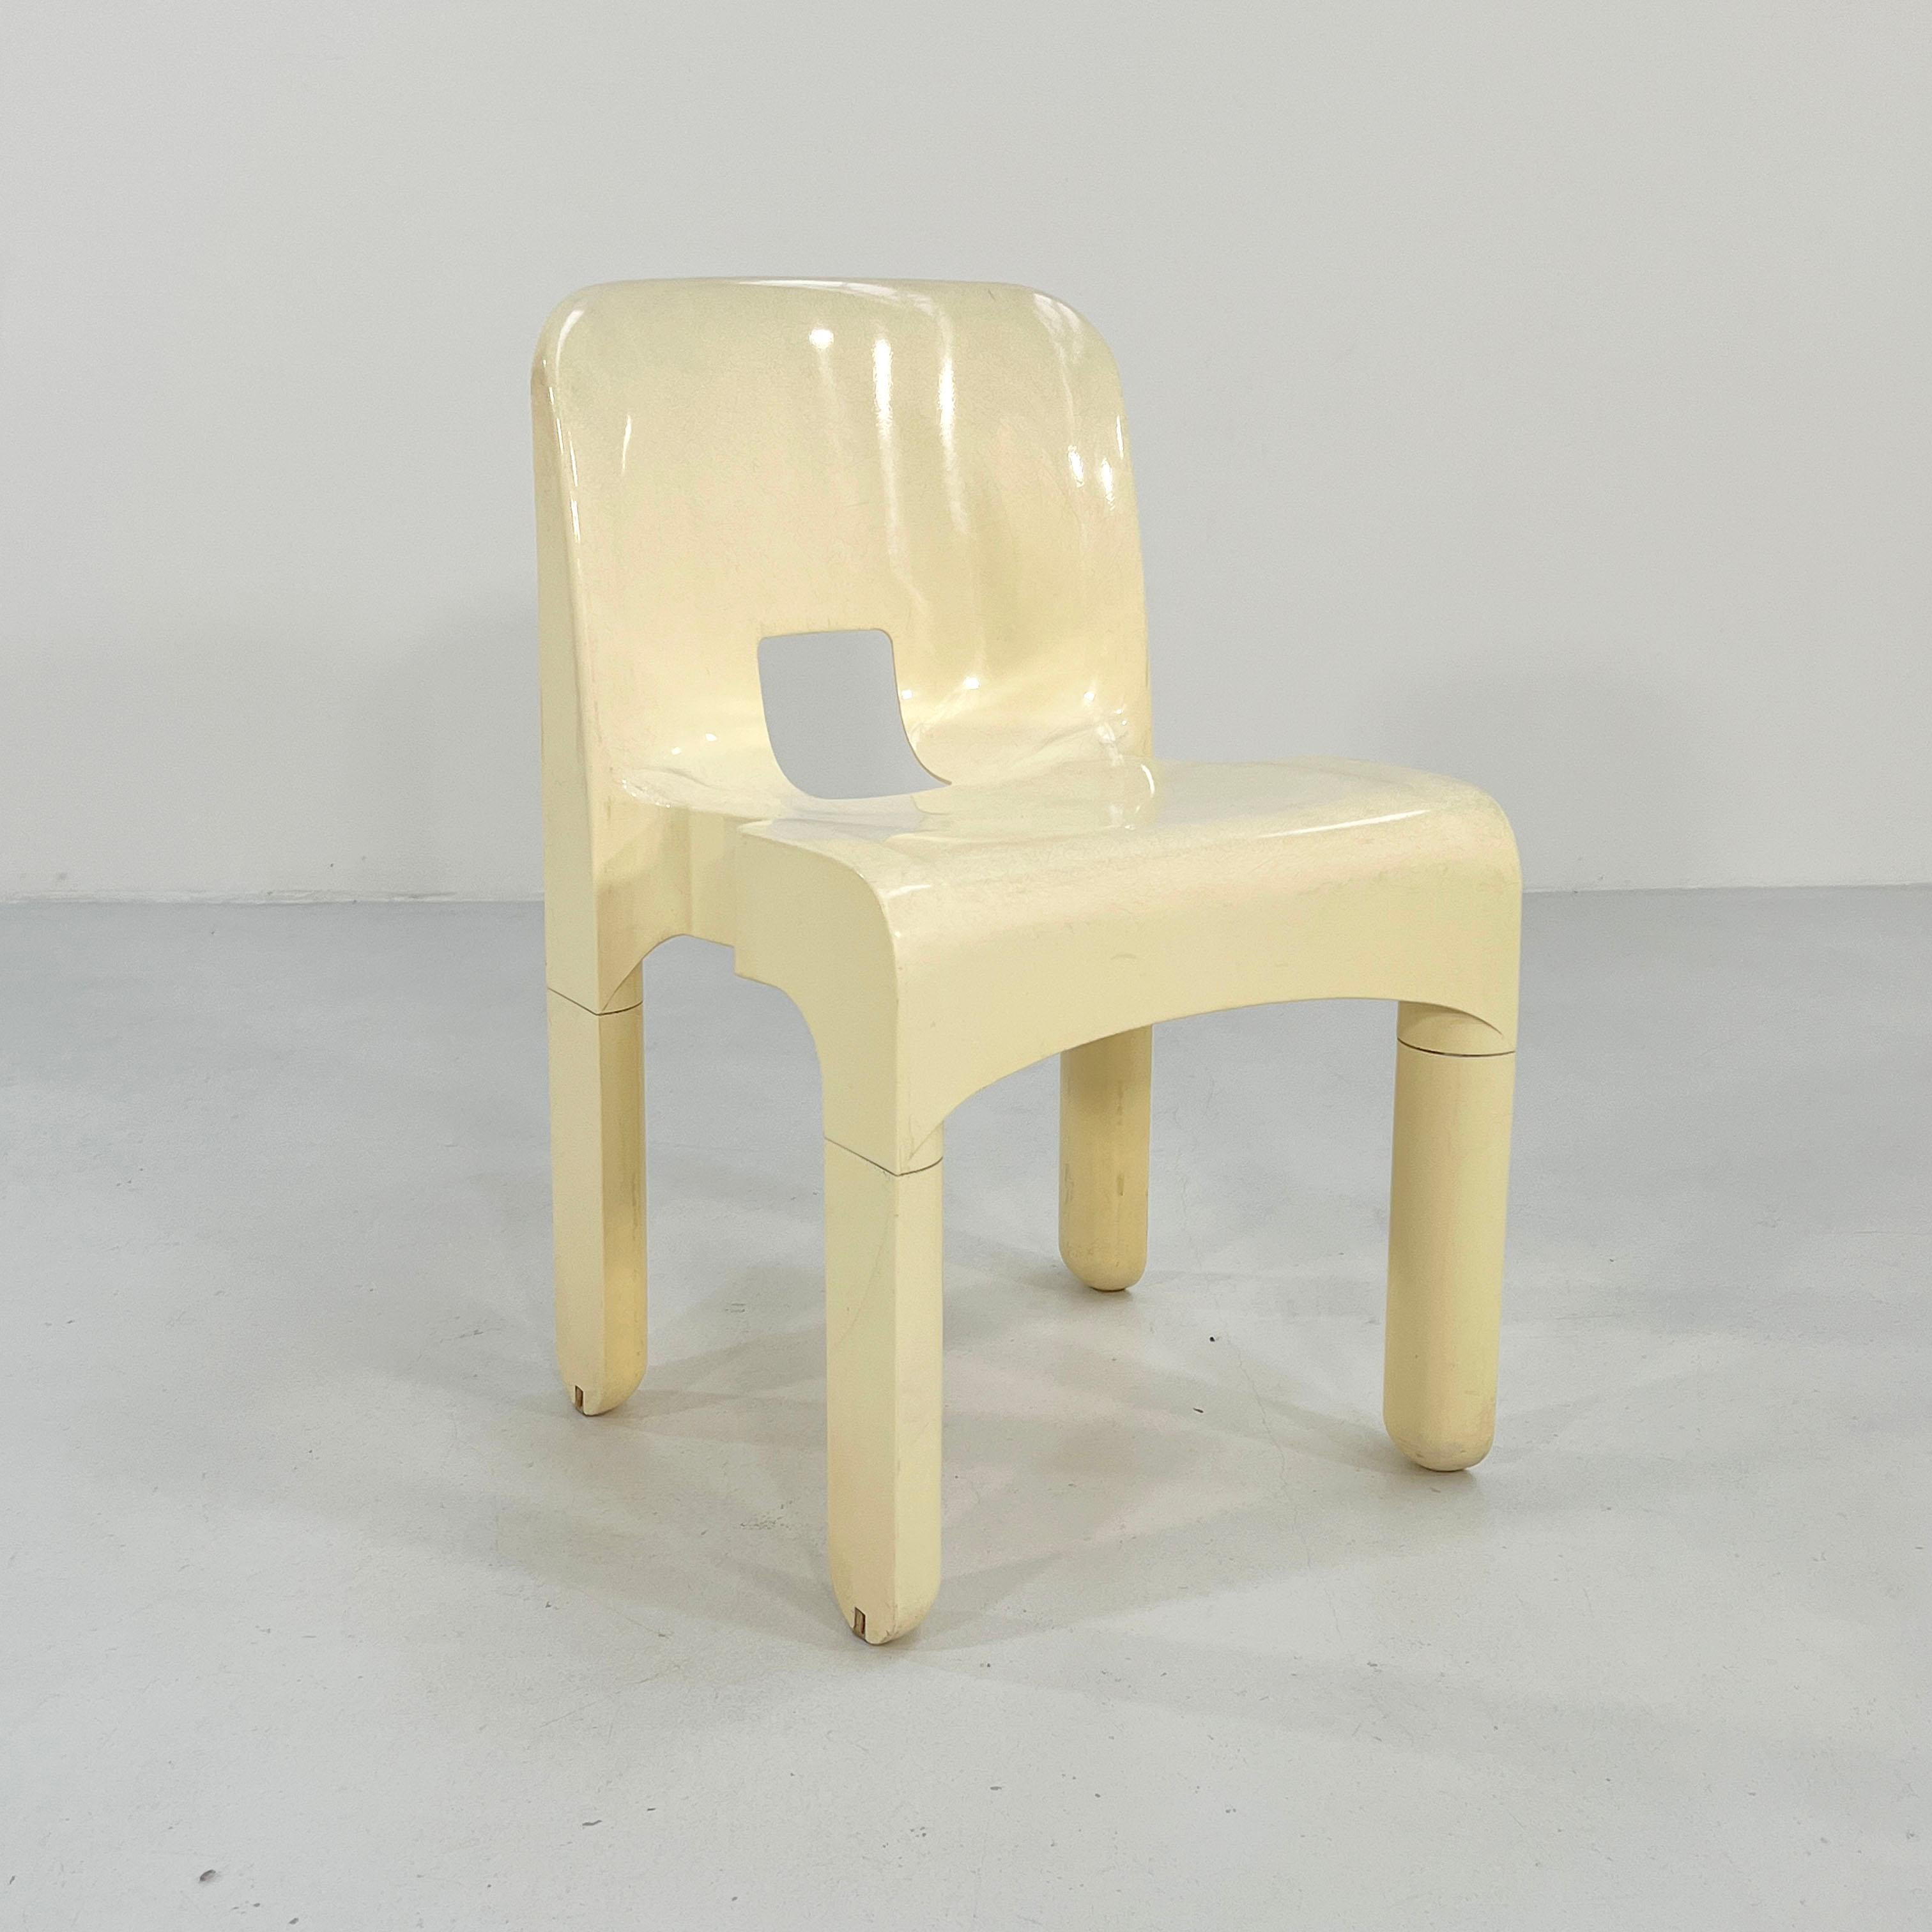 Designer - Joe Colombo
Producer - Kartell
Model - Universale Chair - Model 4868/69
Design Period - Seventies
Measurements - Width 44 cm x Depth 44 cm x Height 72 cm x Seat Height 45 cm
Materials - Plastic
Color - Cream
In its own element.